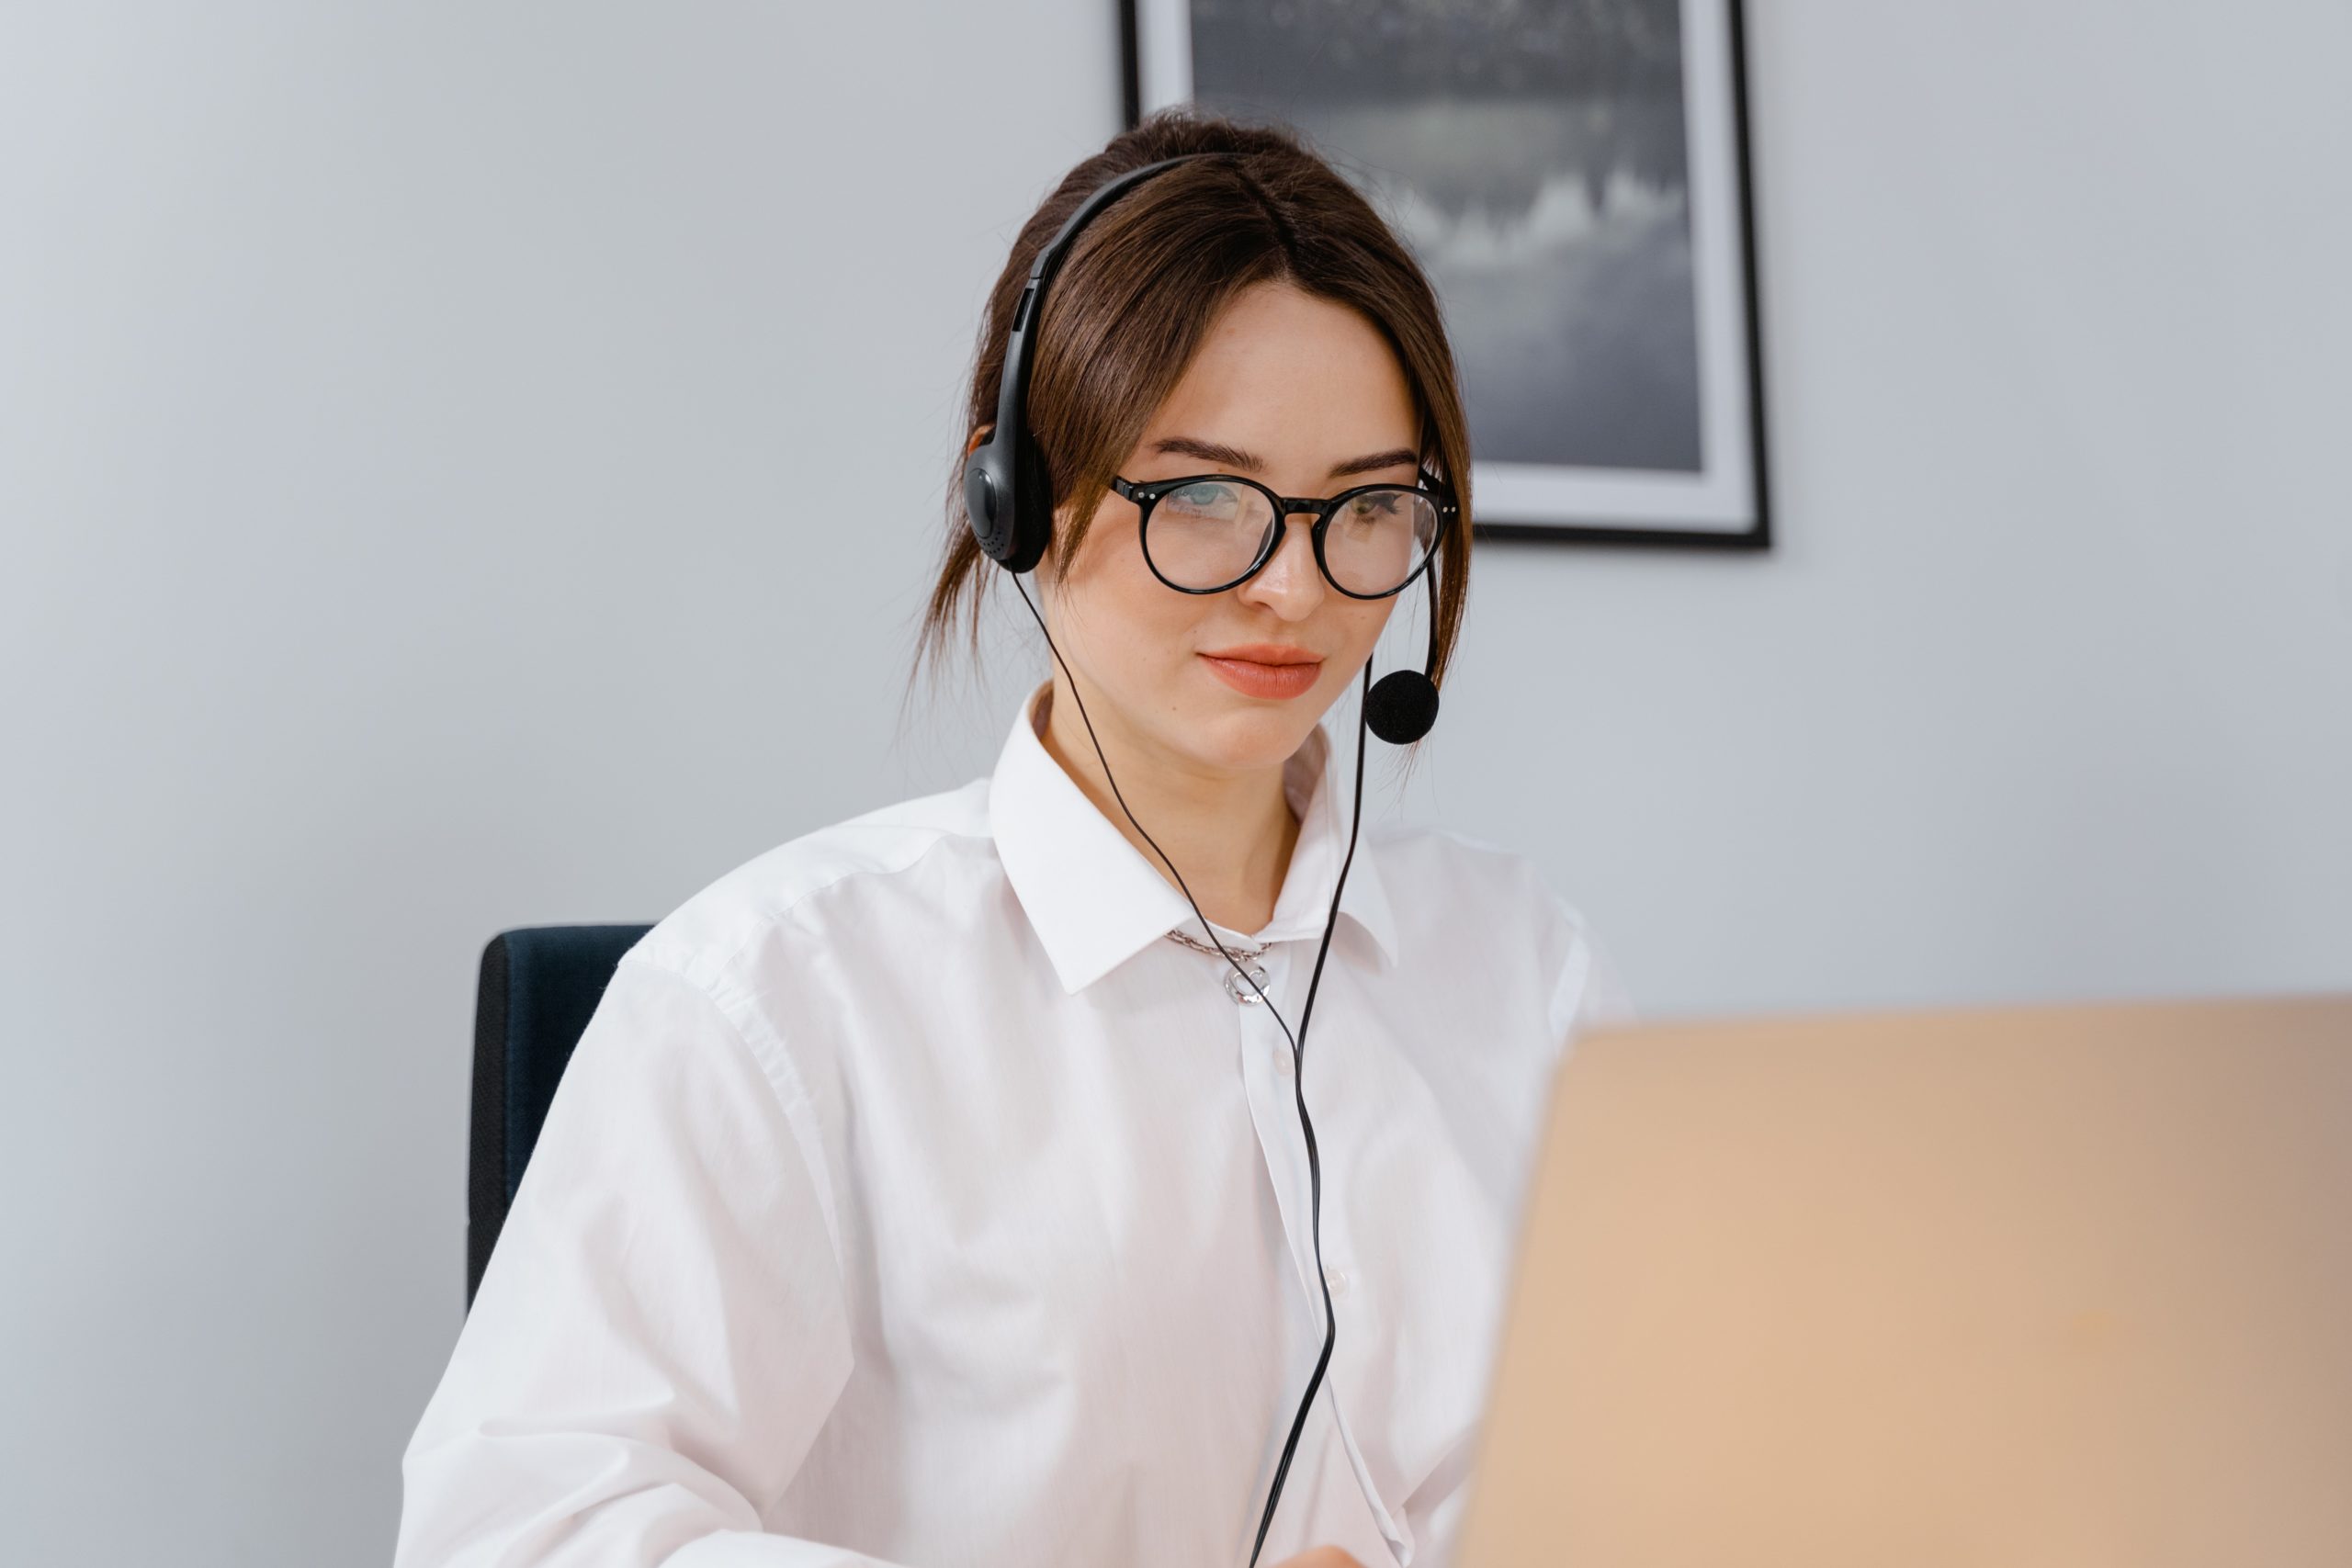 remote worker speaking on a headset